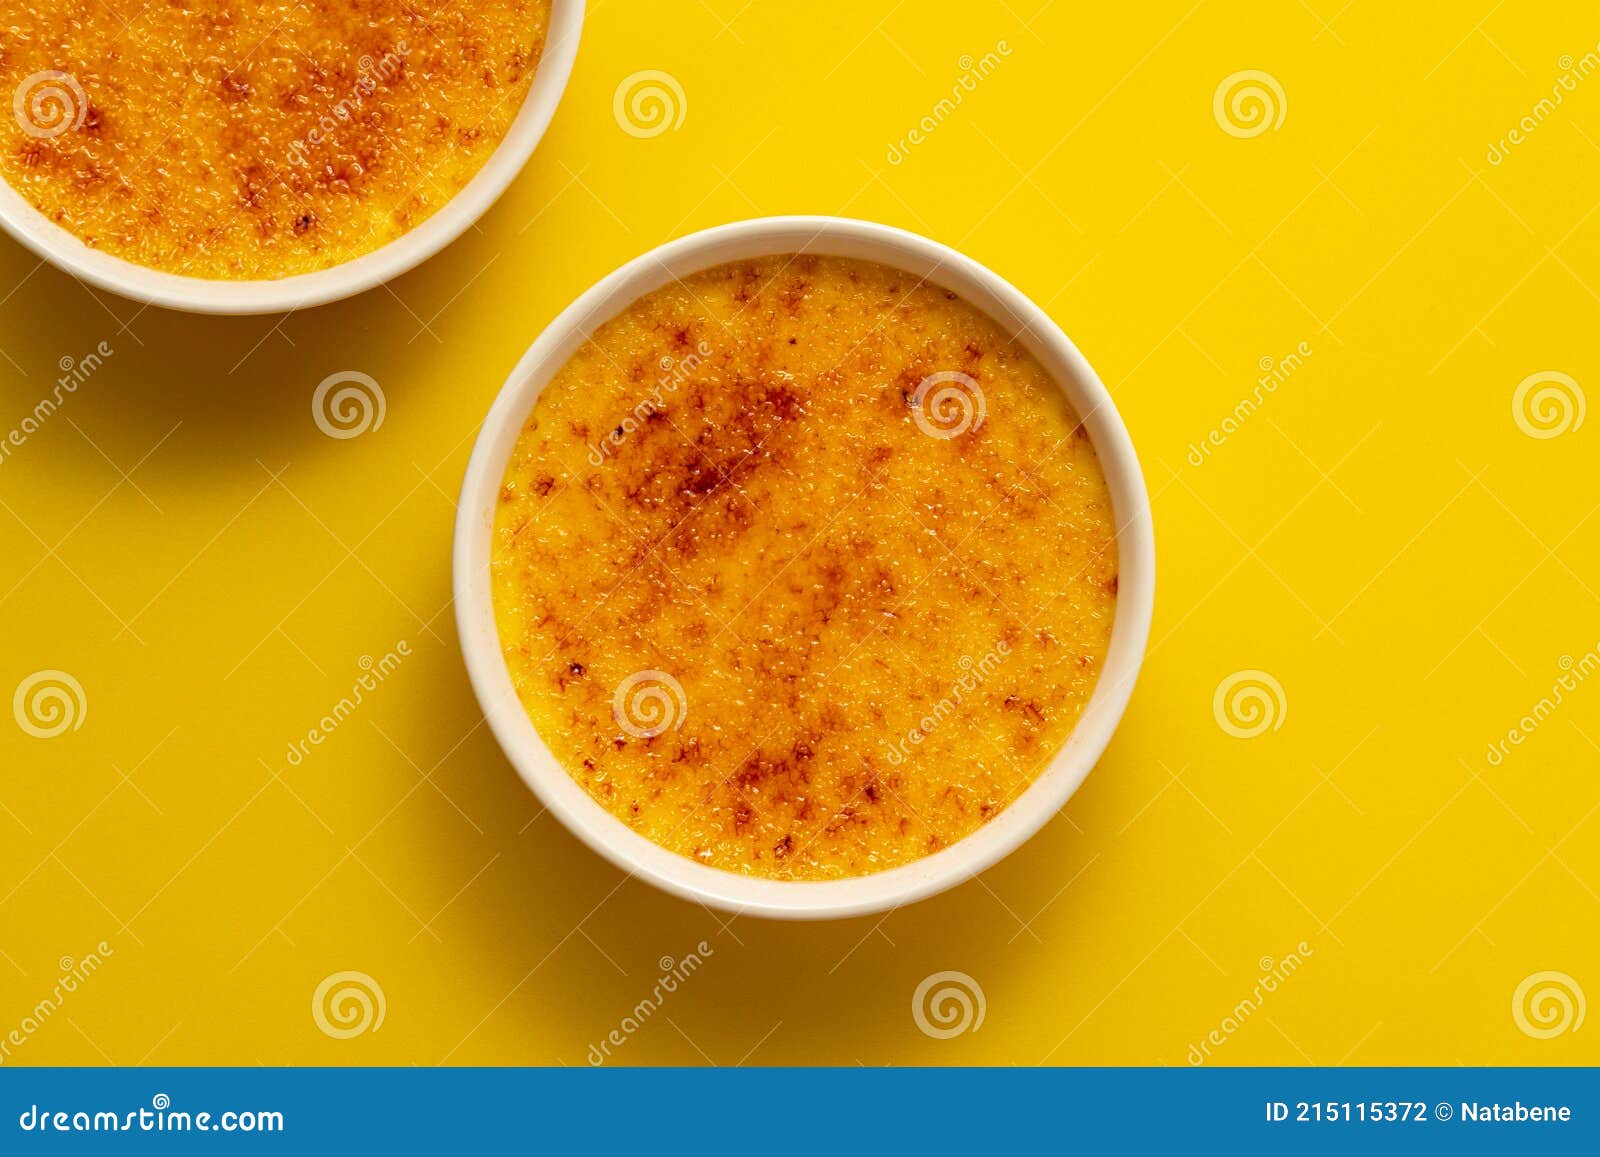 creme brulee in ramekin  on bright yellow color background.